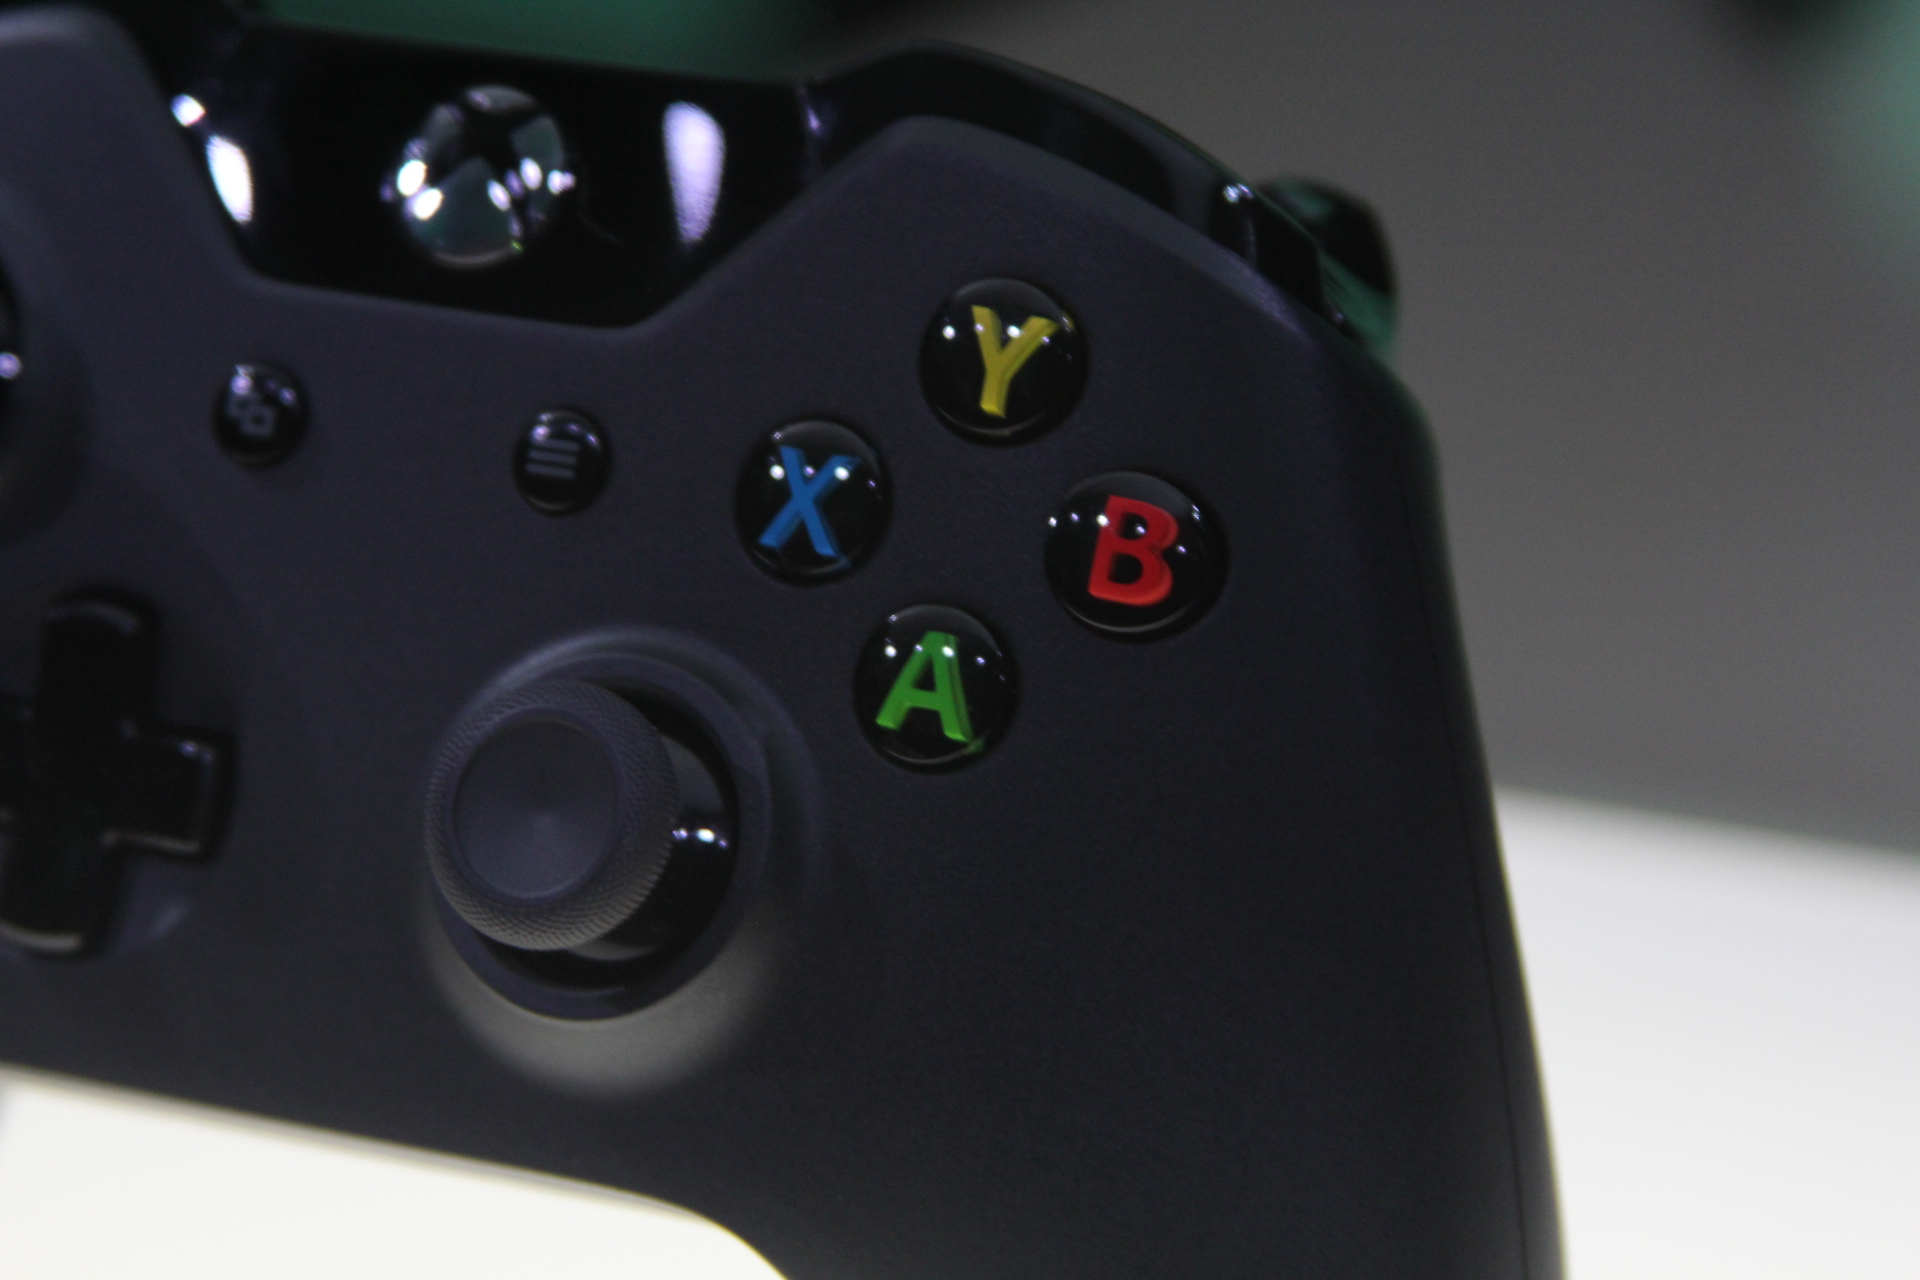 Eyes on the Xbox One: An edgy beast with a new controller and Kinect sensor